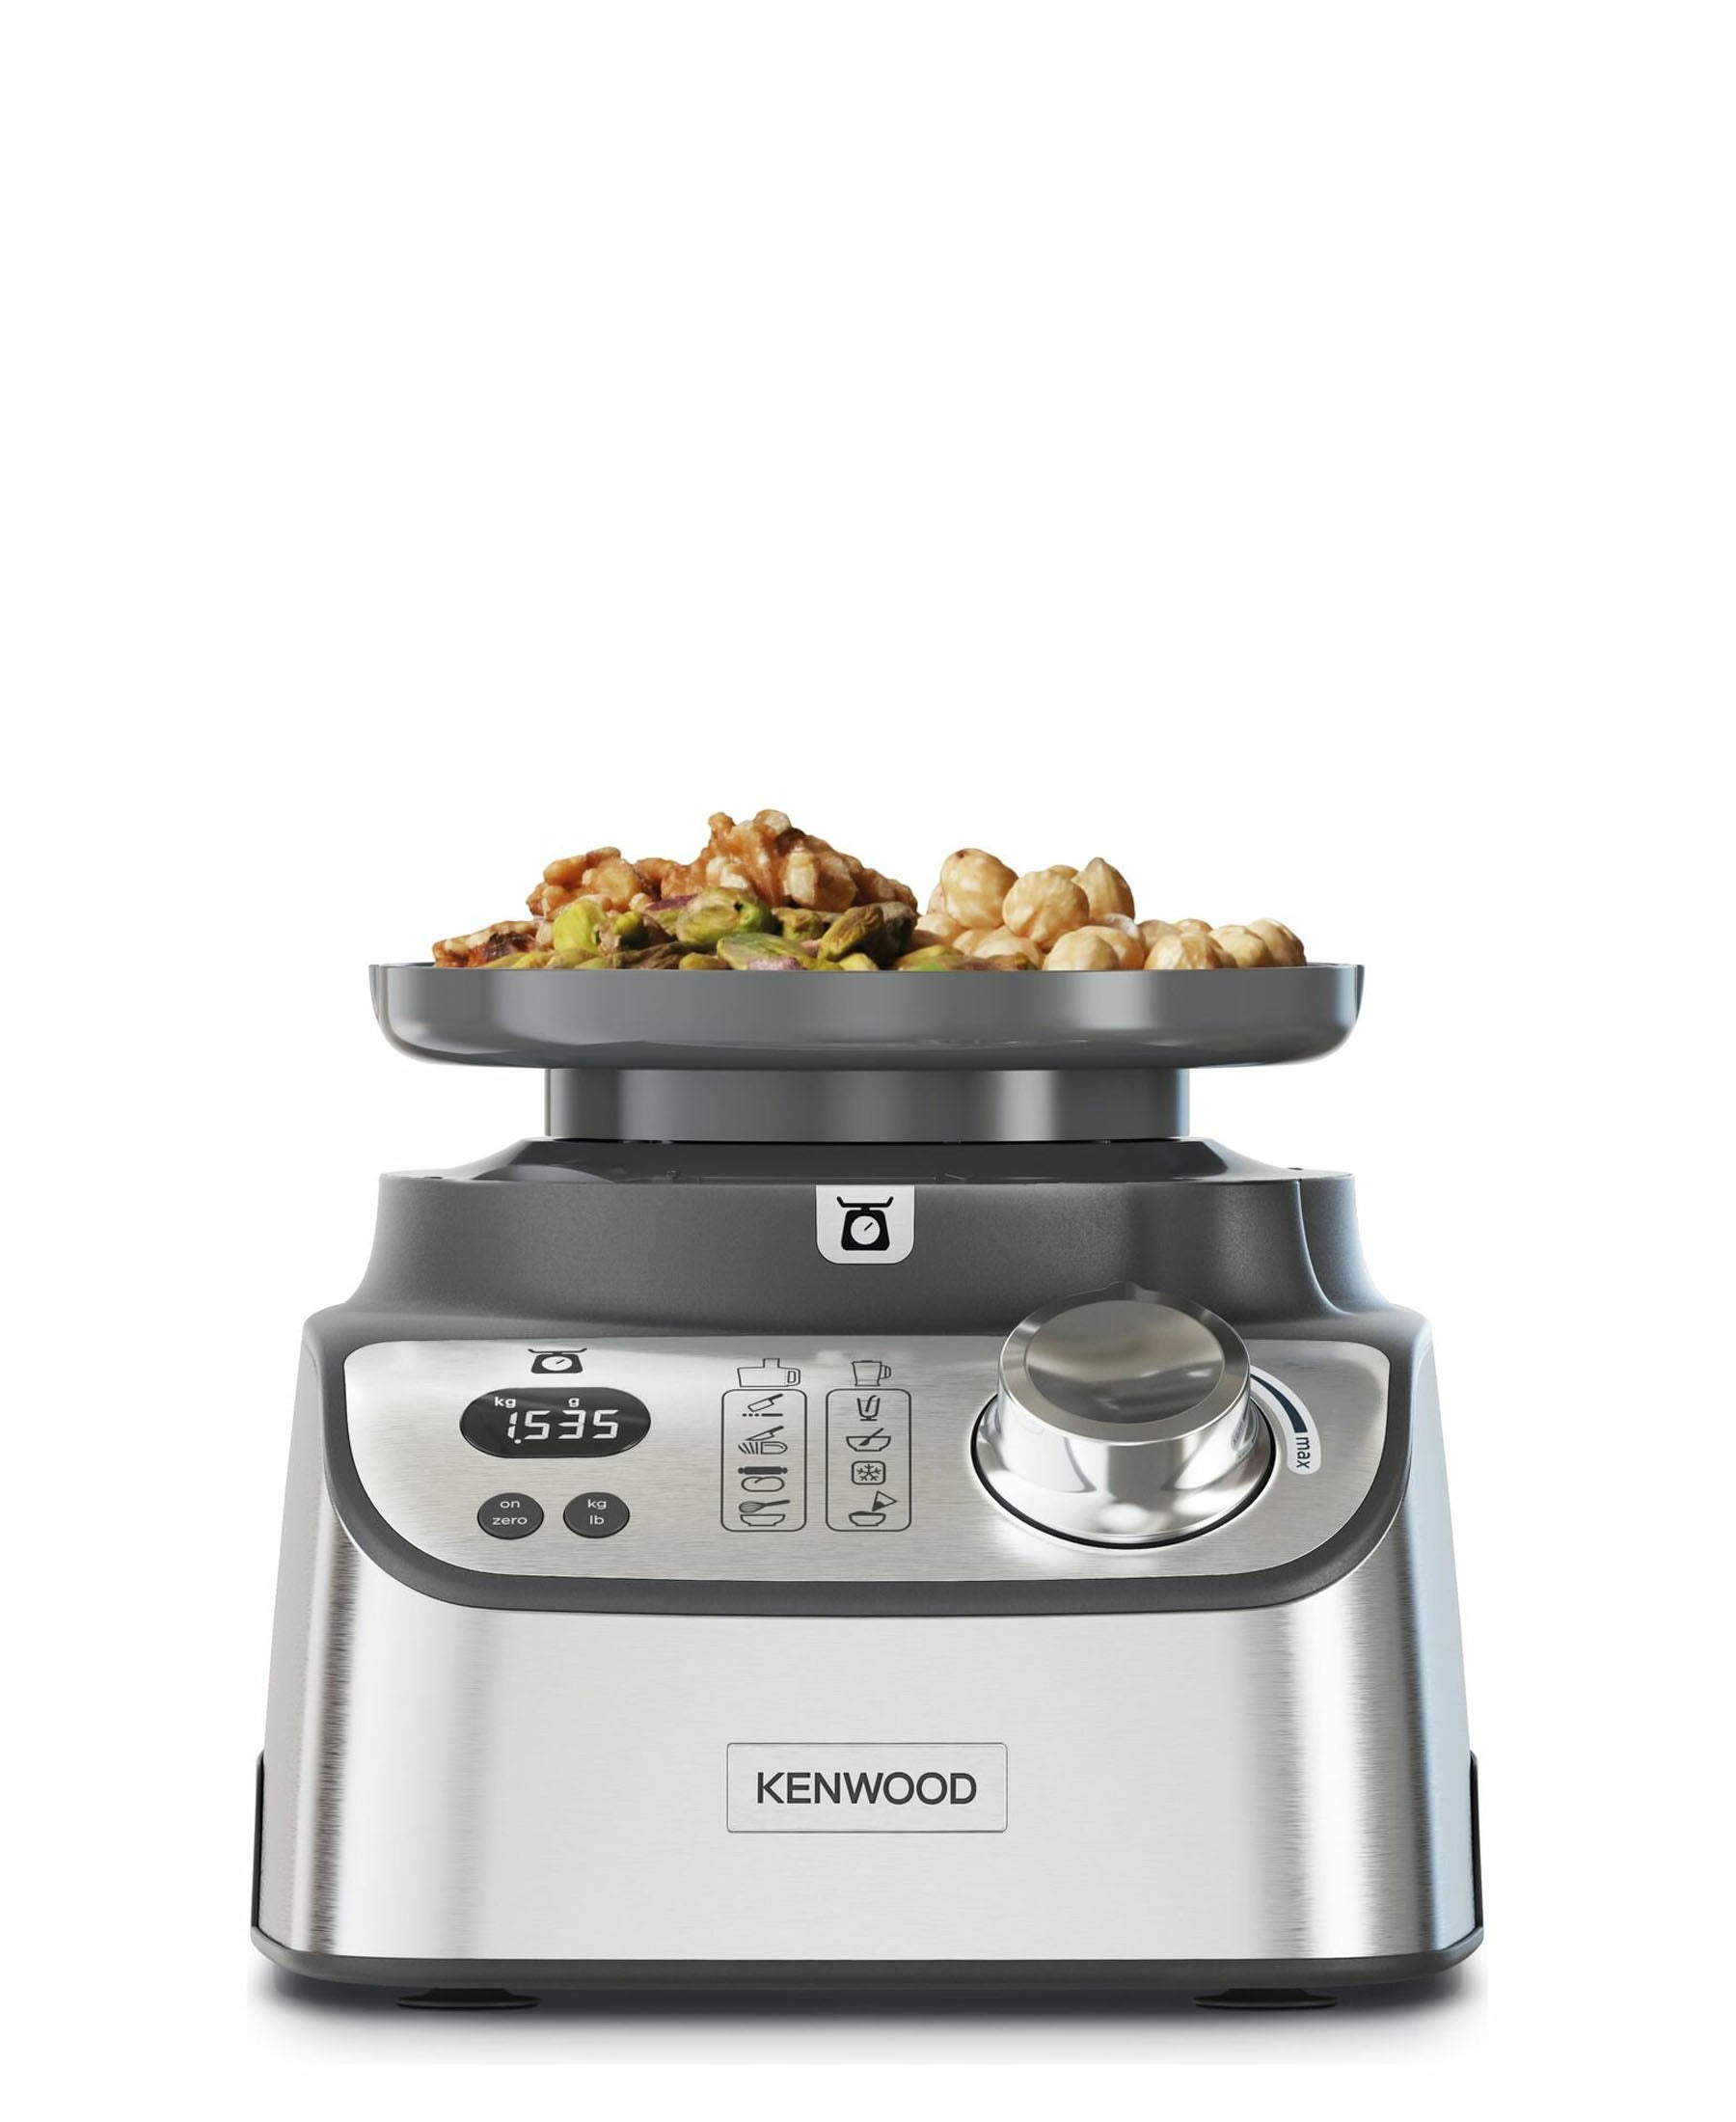 Kenwood Multipro Express Weigh 3L Food Processor - Silver